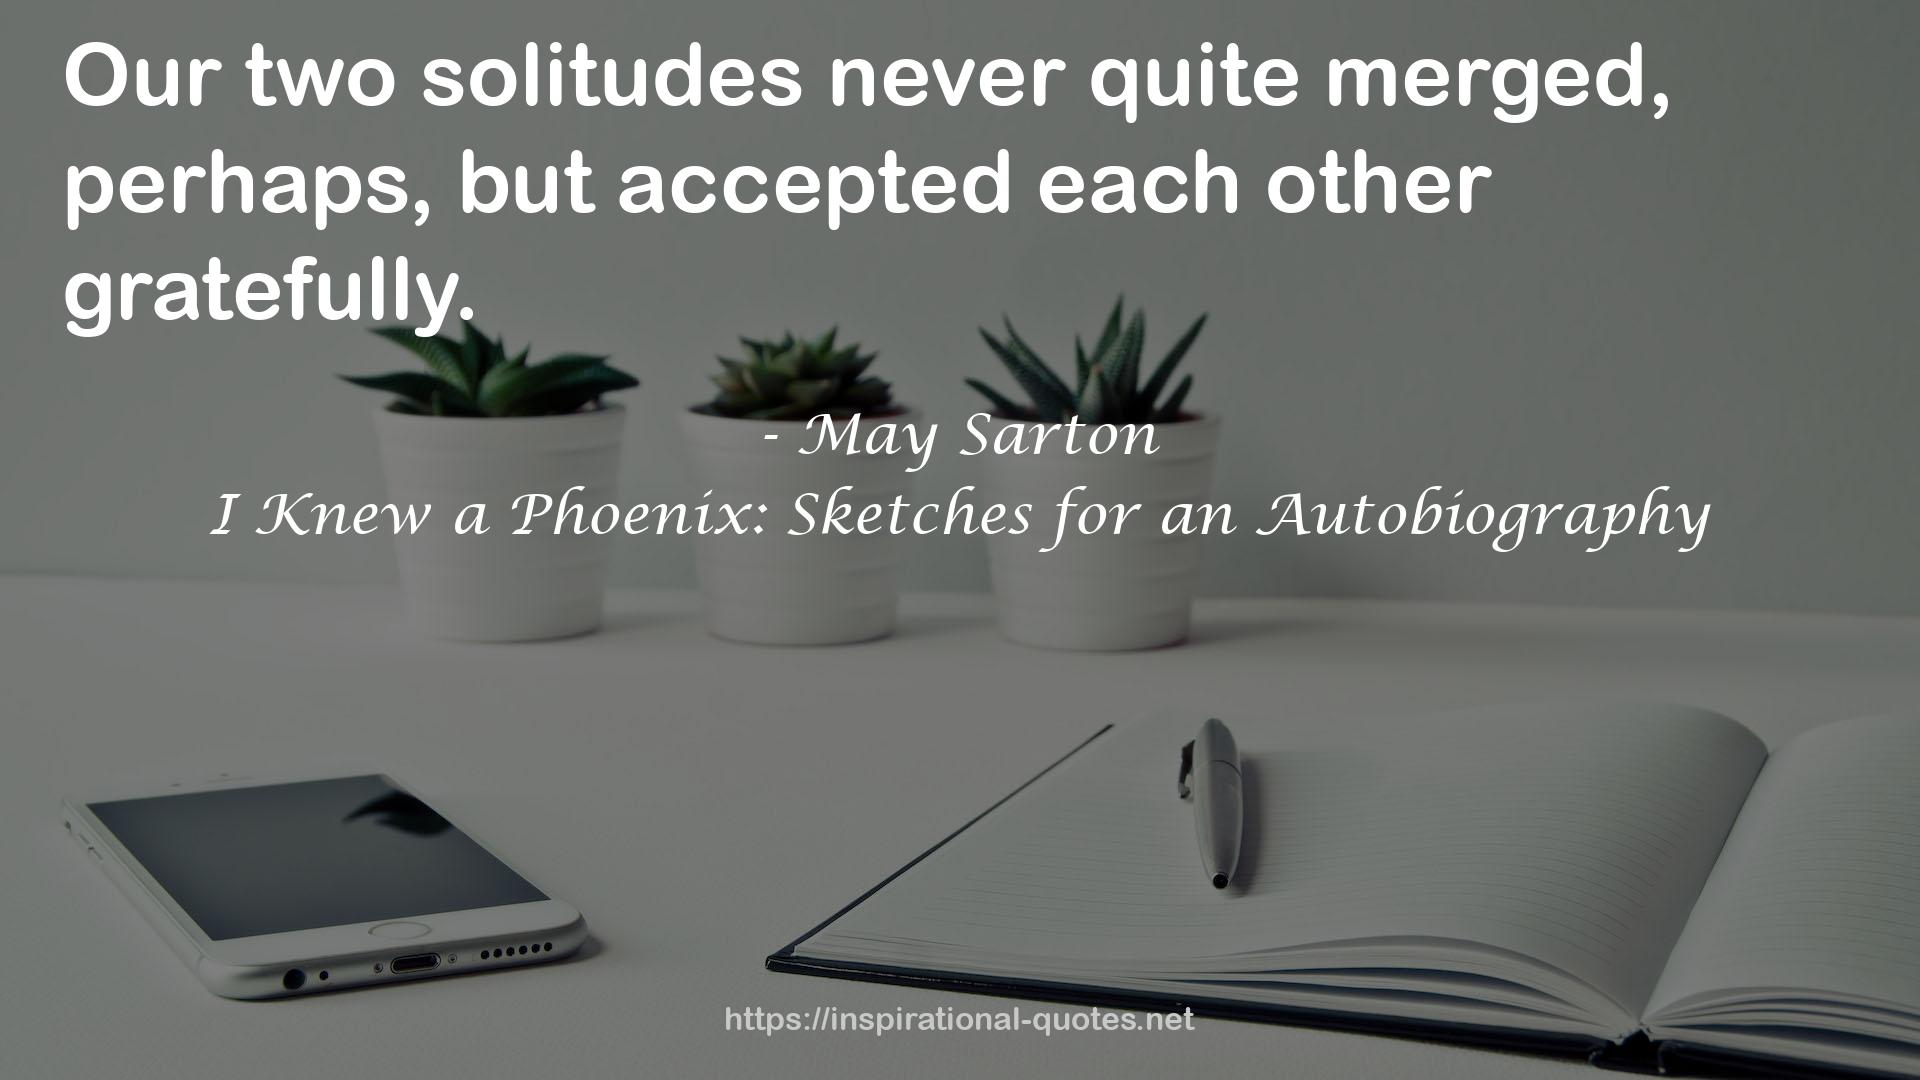 I Knew a Phoenix: Sketches for an Autobiography QUOTES